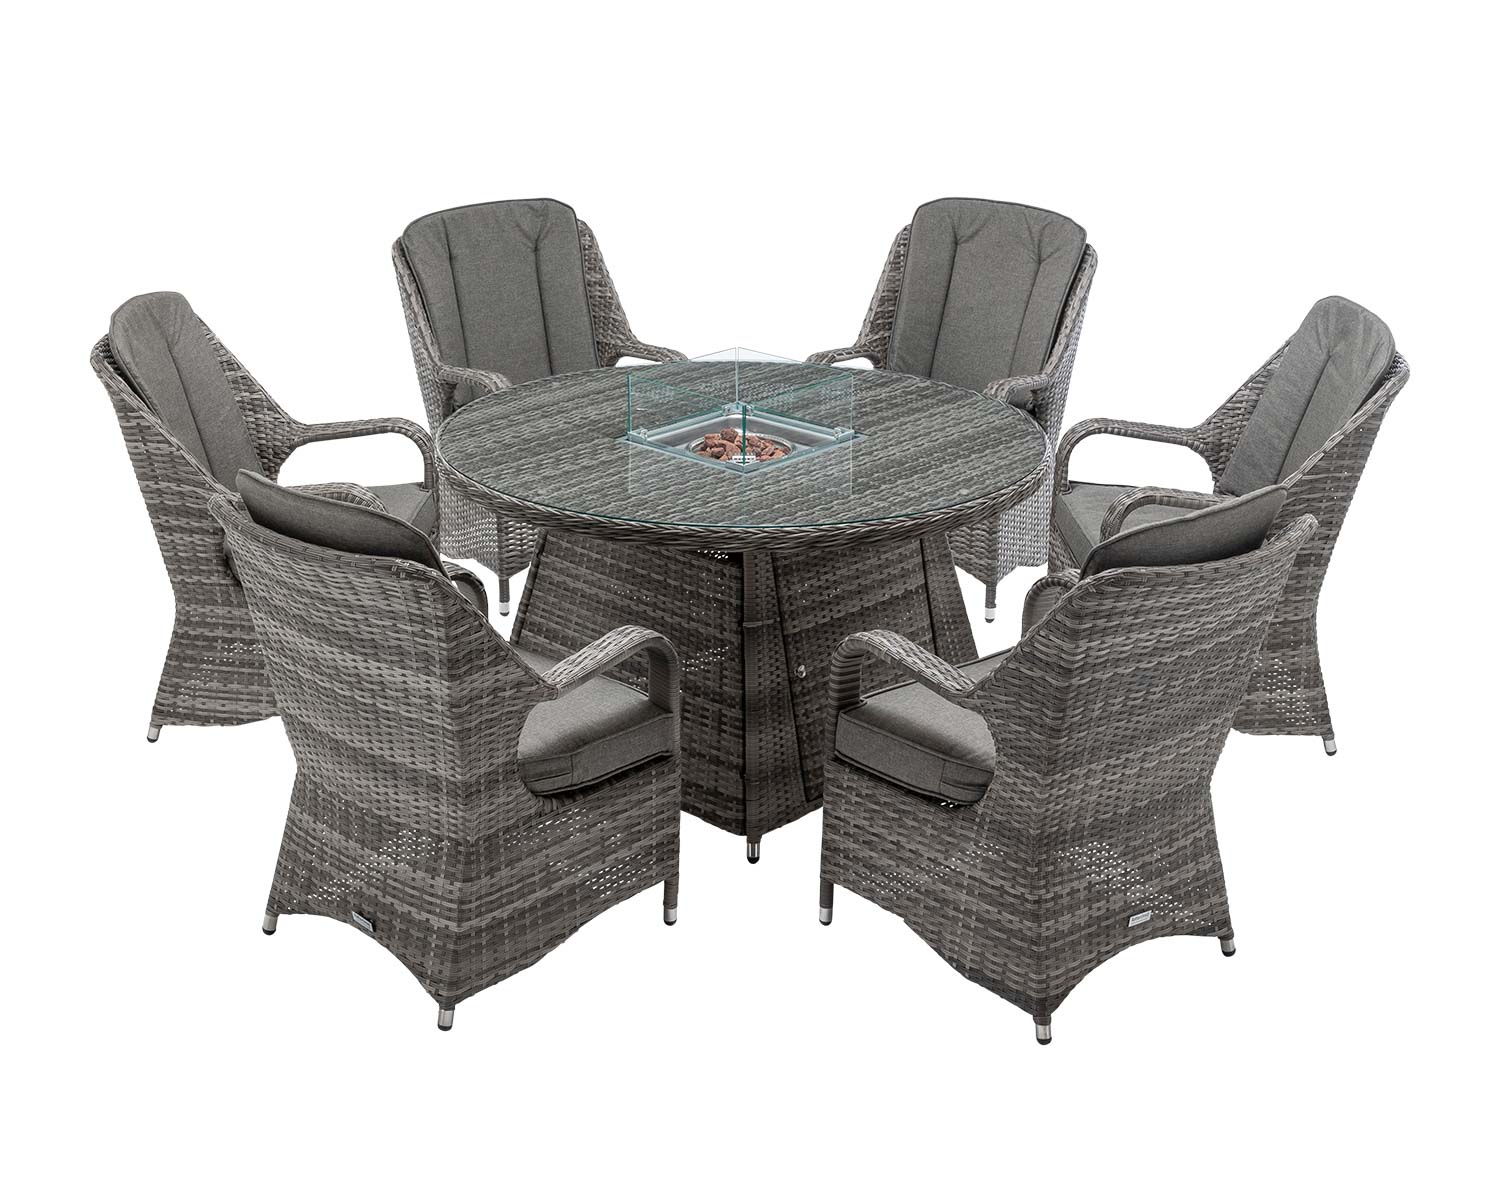 6 Seat Rattan Garden Dining Set With Round Table In Grey With Fire Pit Marseille Rattan Direct